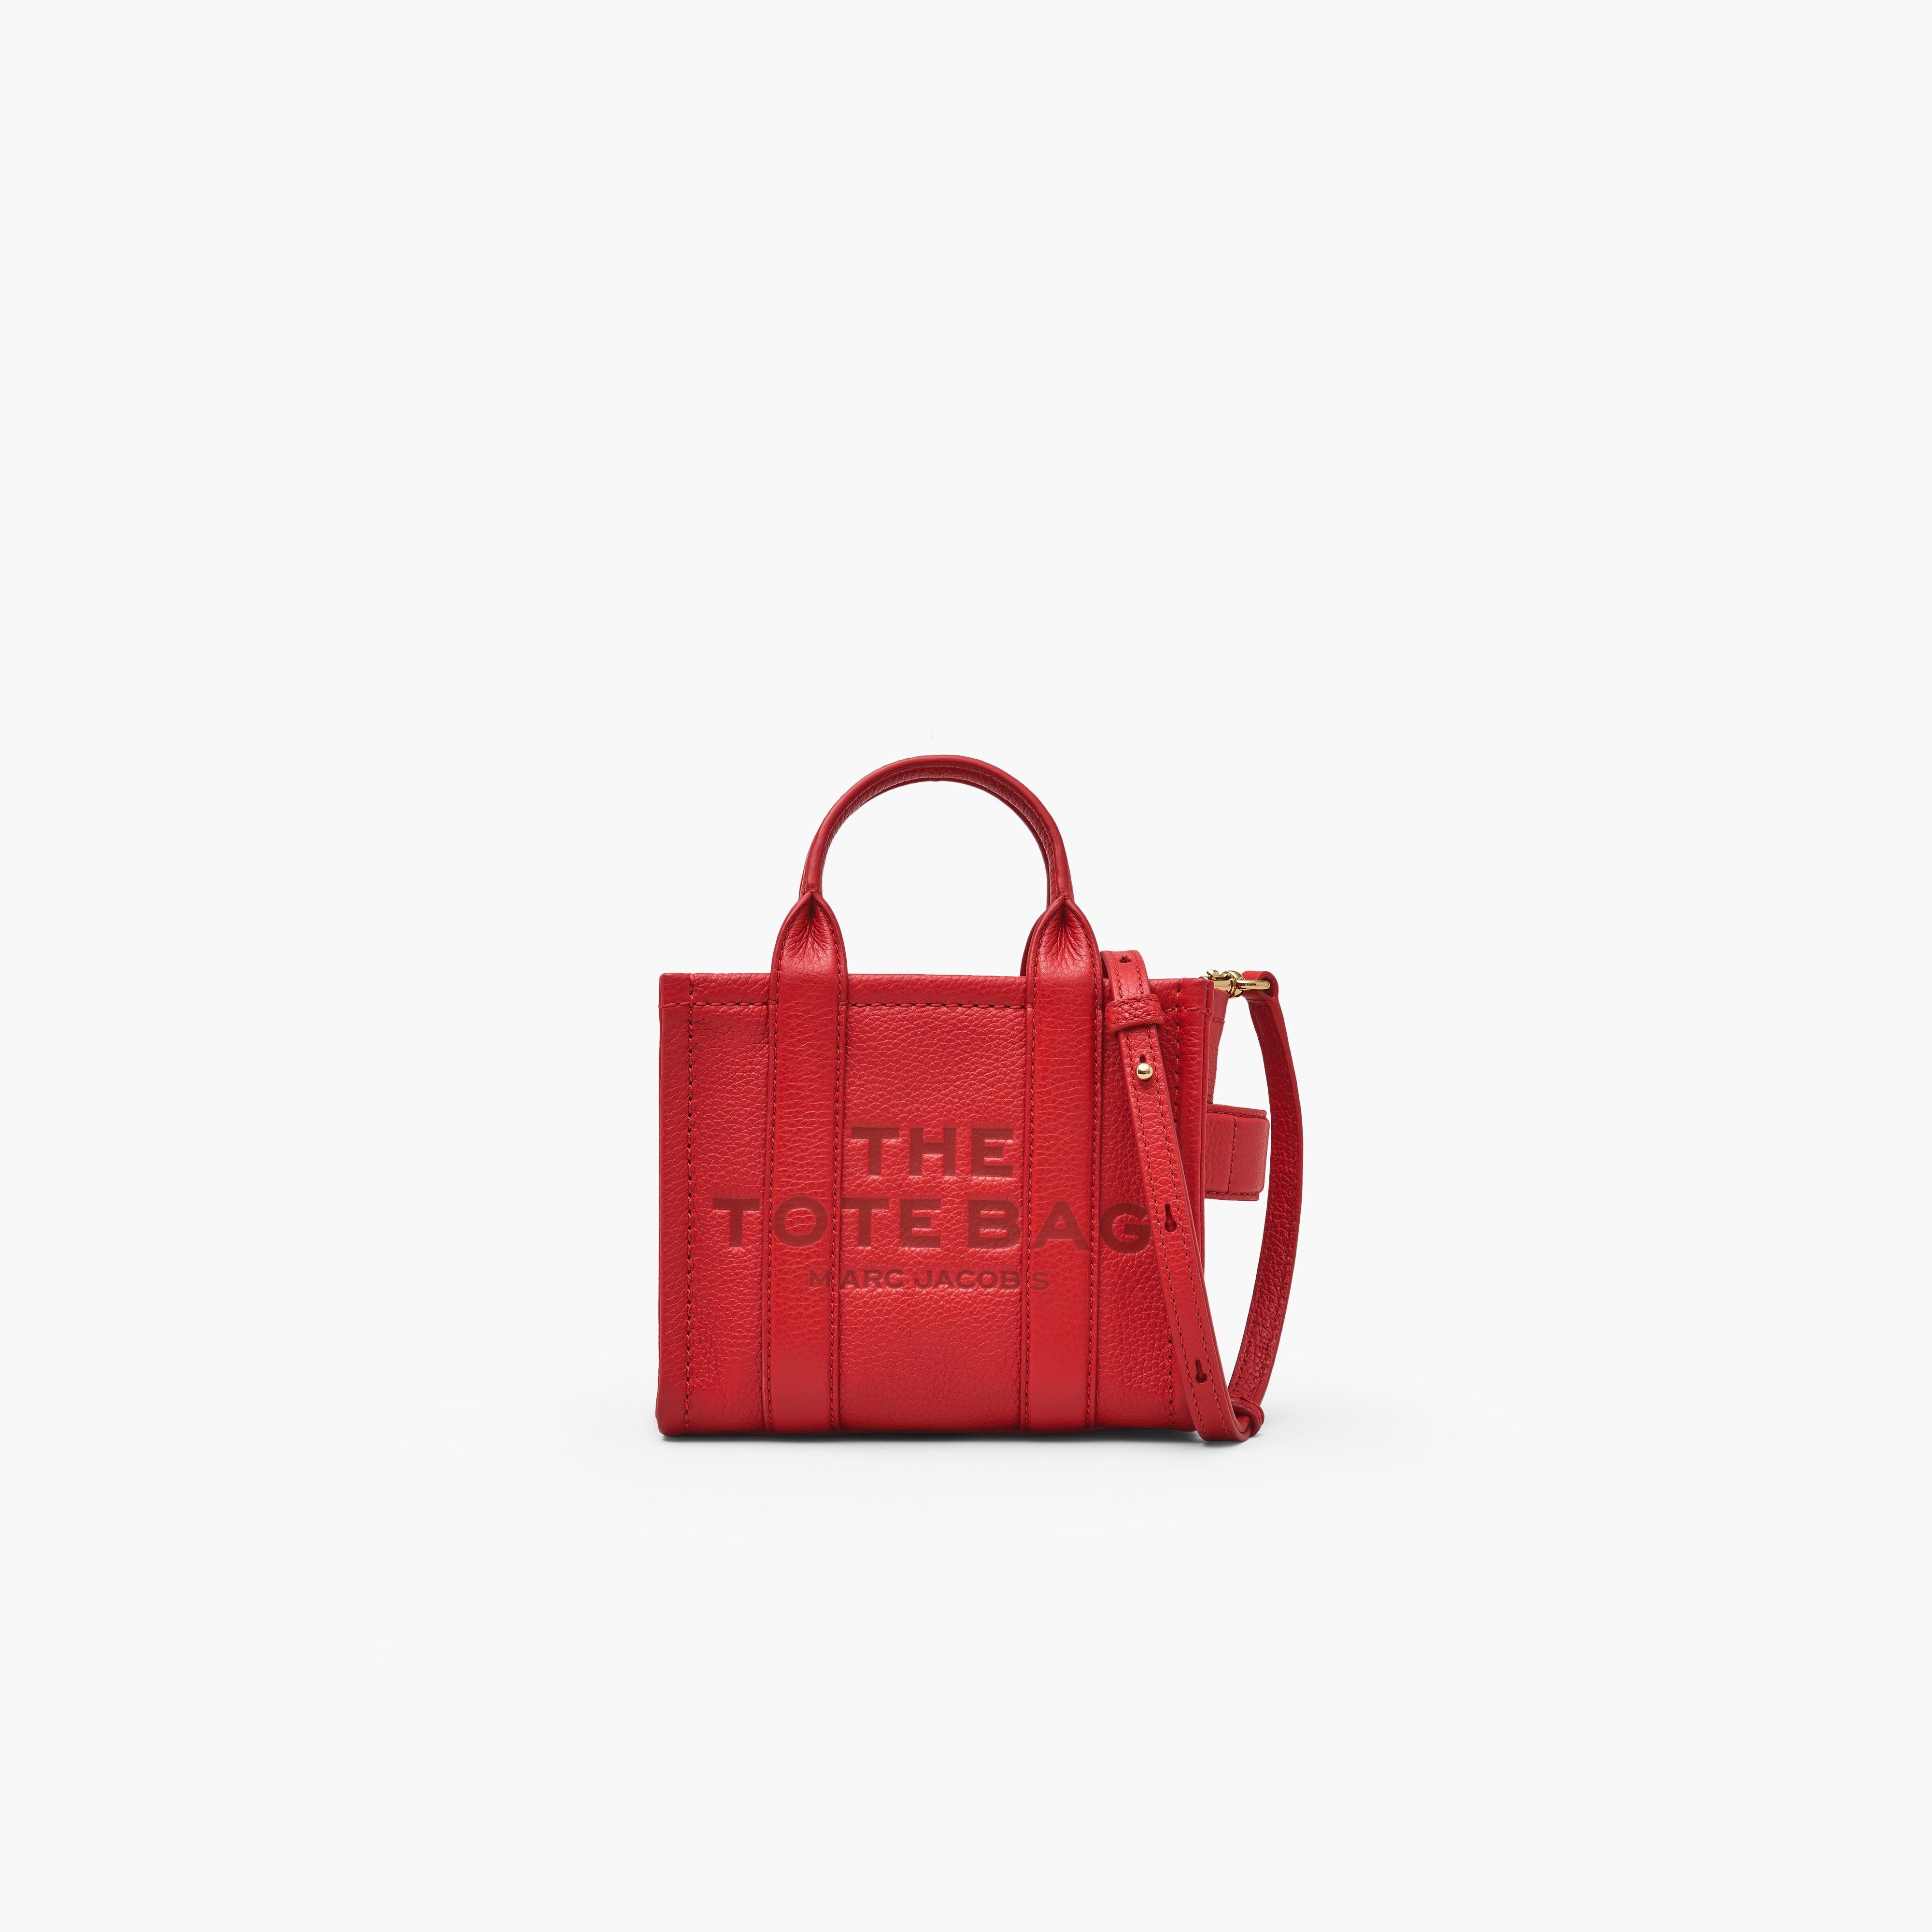 Marc by Marc jacobs The Leather Mini Tote Bag,TRUE RED